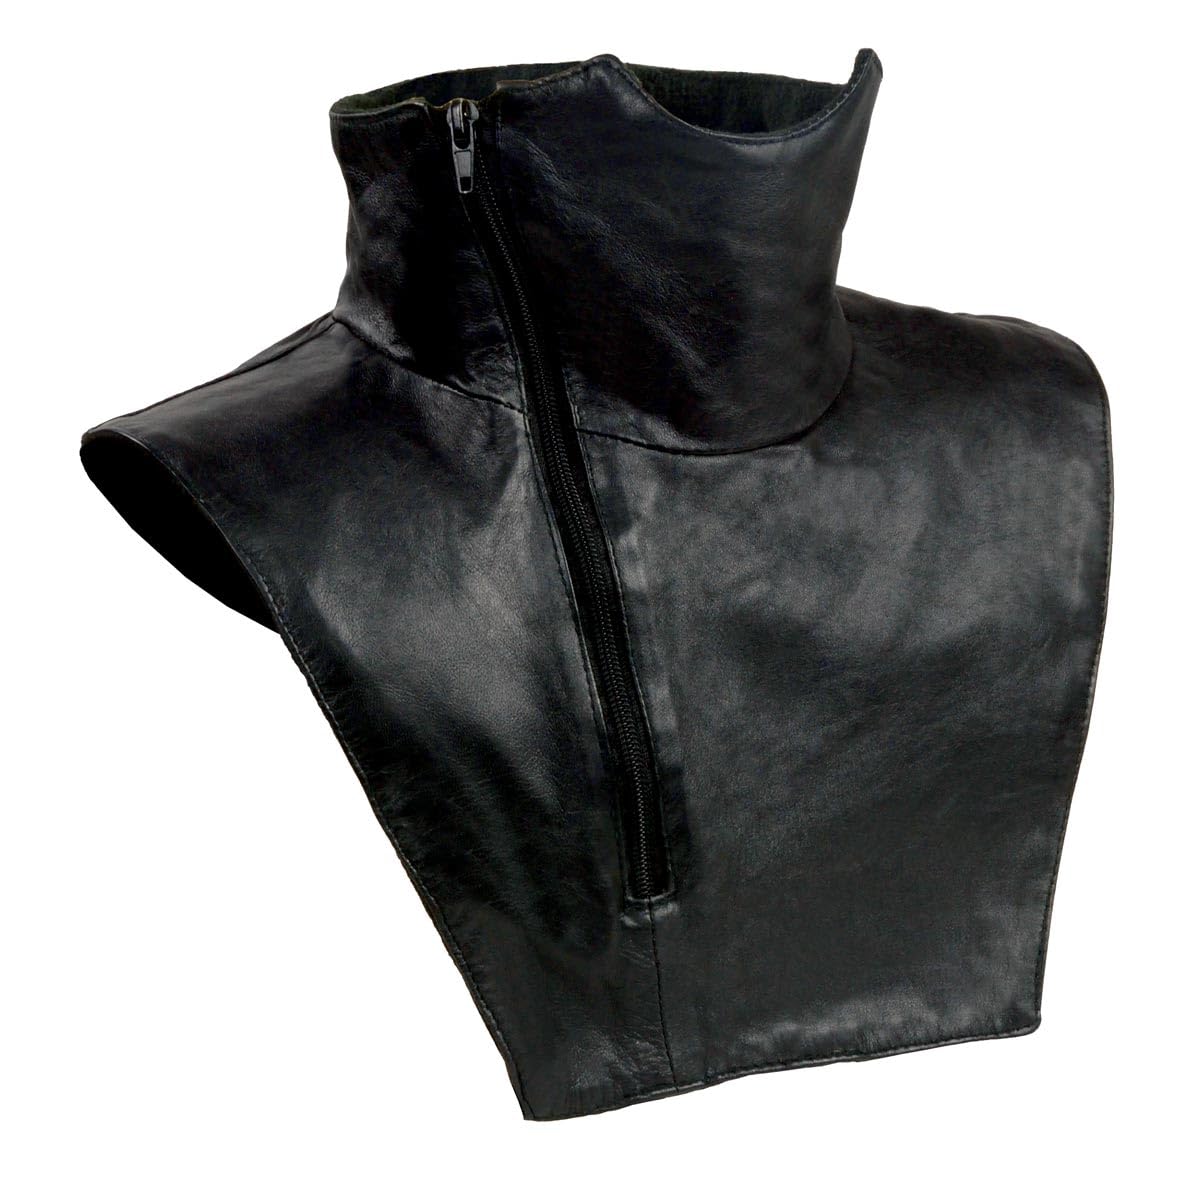 Milwaukee Leather Unisex Black Premium Leather Neck Warmer with Fleece Liners for Cold Weather